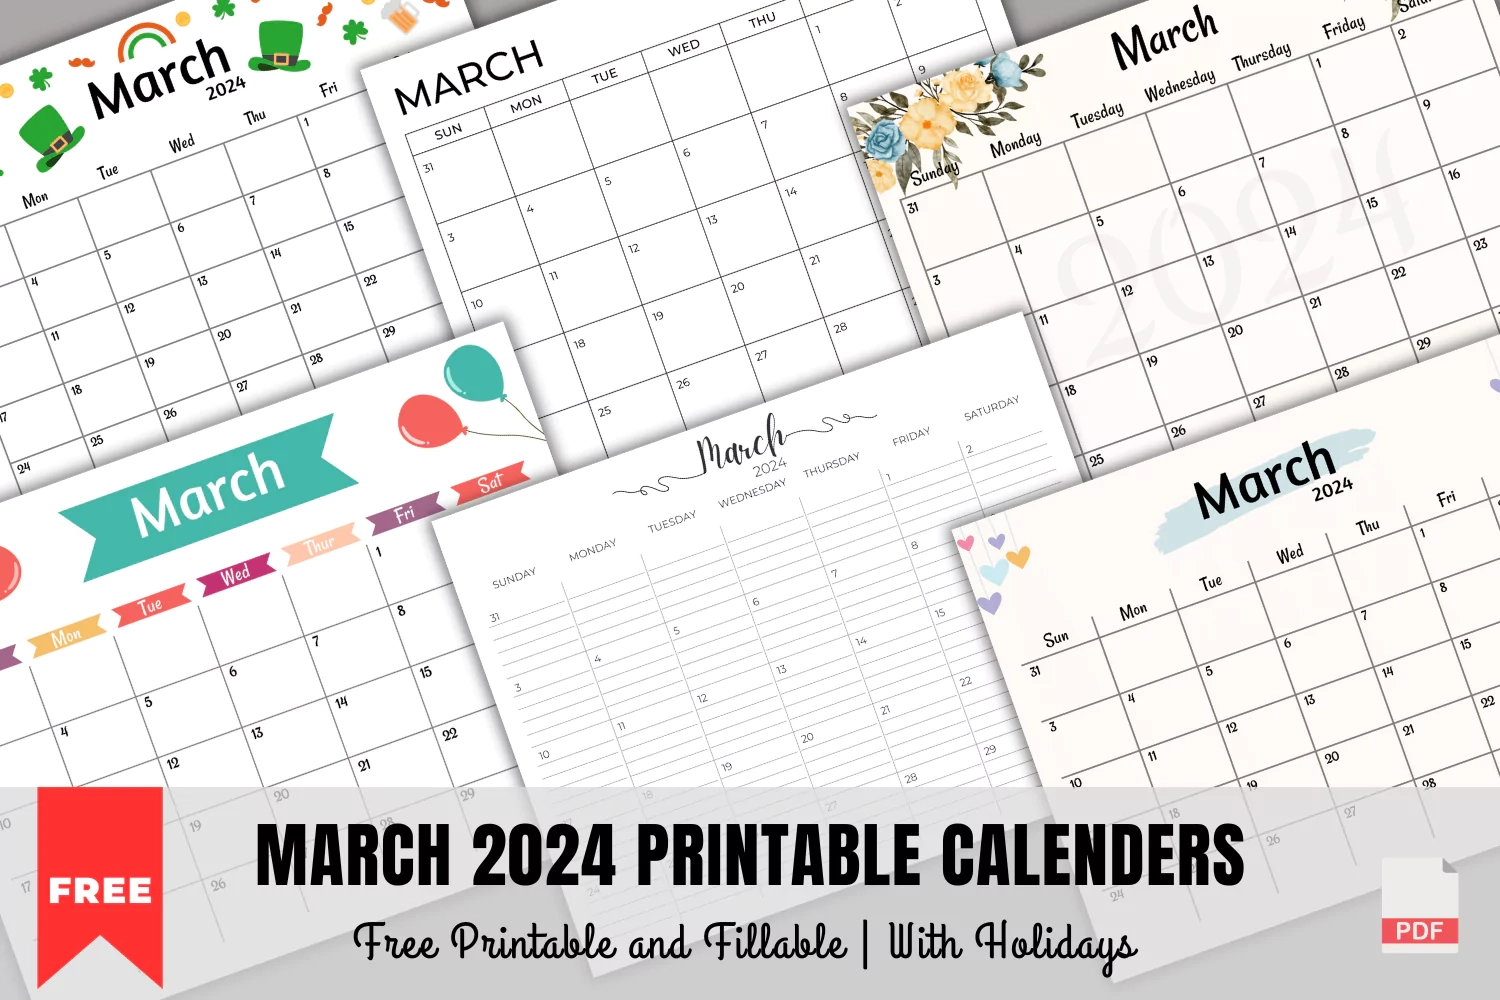 Free Printable &amp;amp; Fillable March Calendar 2024 with regard to Free Printable And Fillable Calendar For 2024